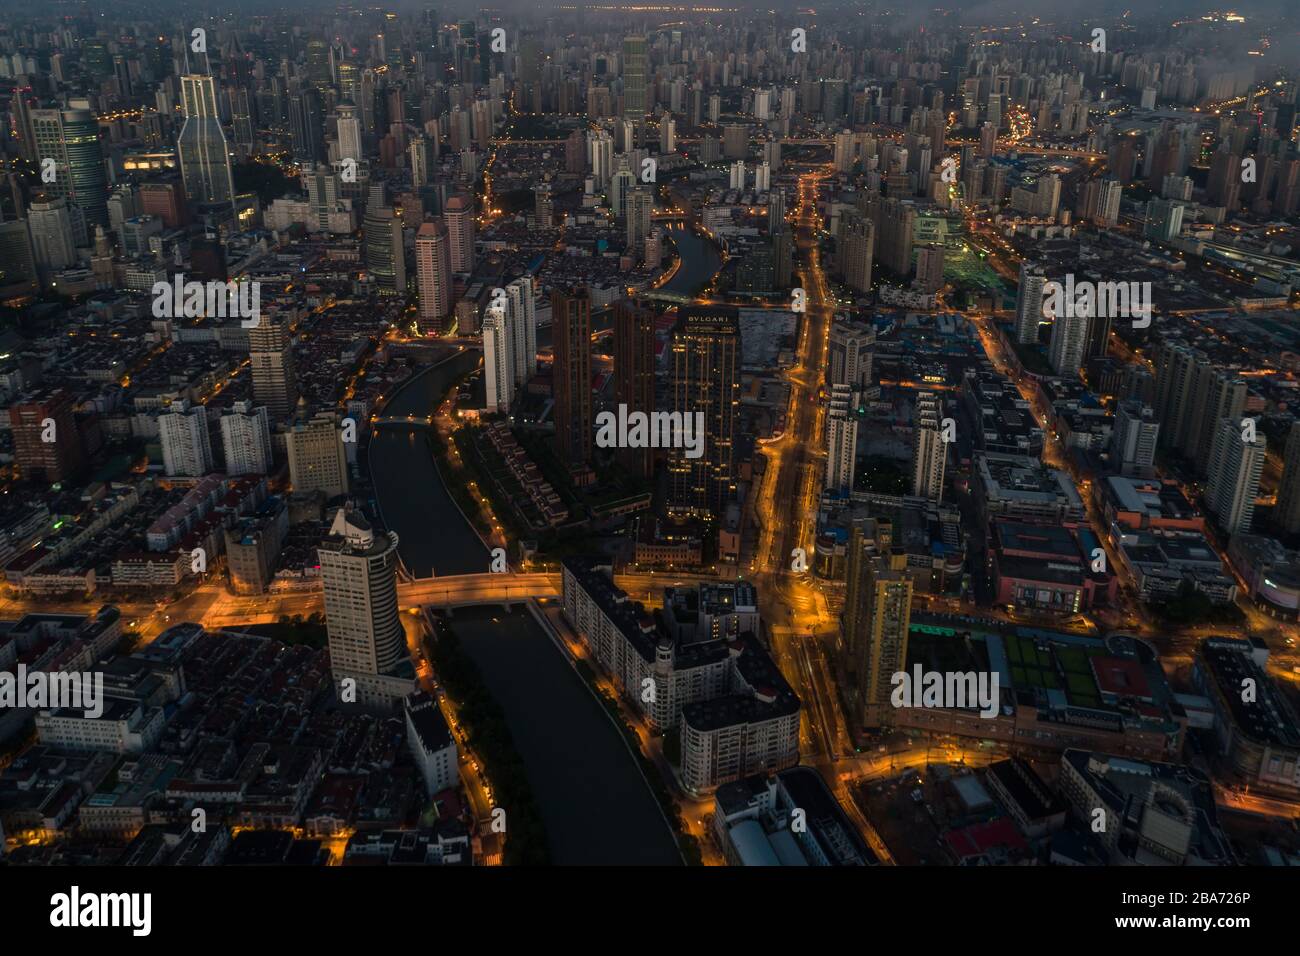 Aerial view over The Bund, Shanghai Stock Photo